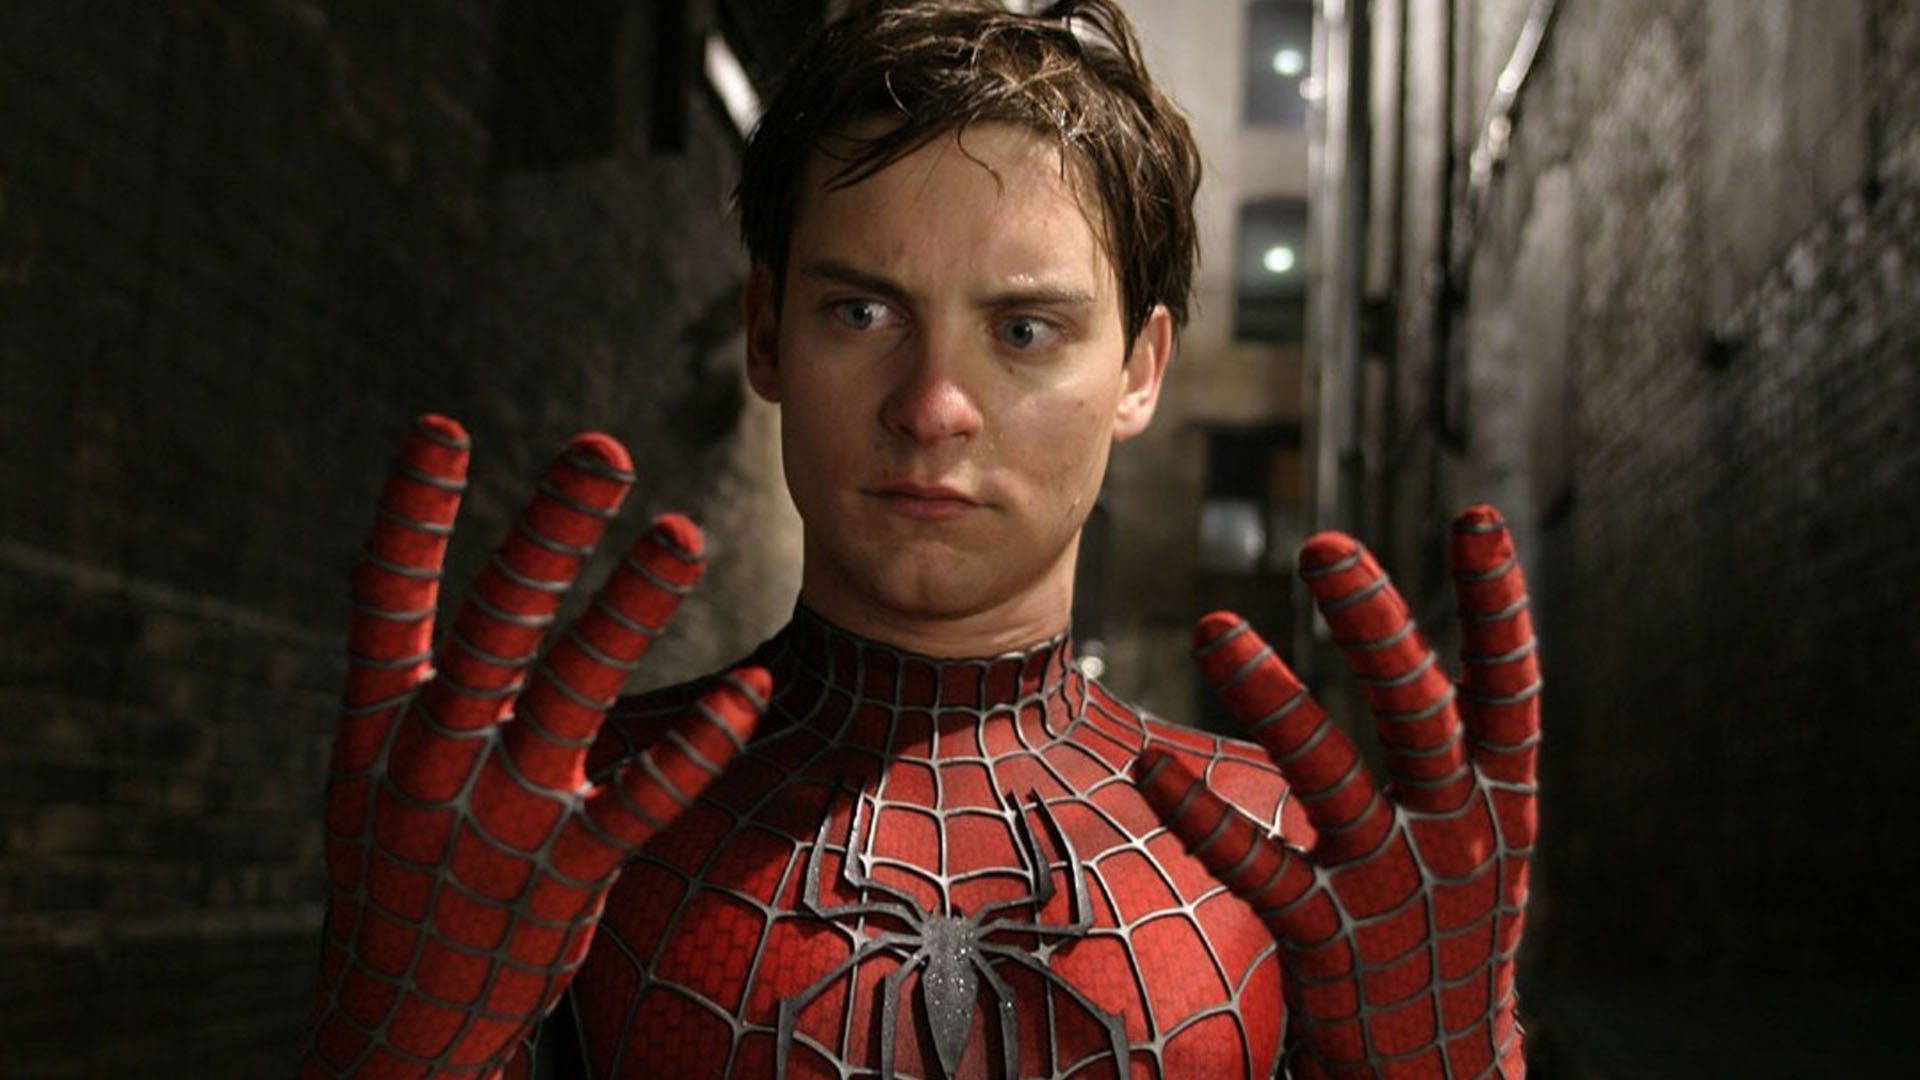 Fans campaign, Tobey Maguire's Spider-Man 4, Movies, Spider-Man, 1920x1080 Full HD Desktop